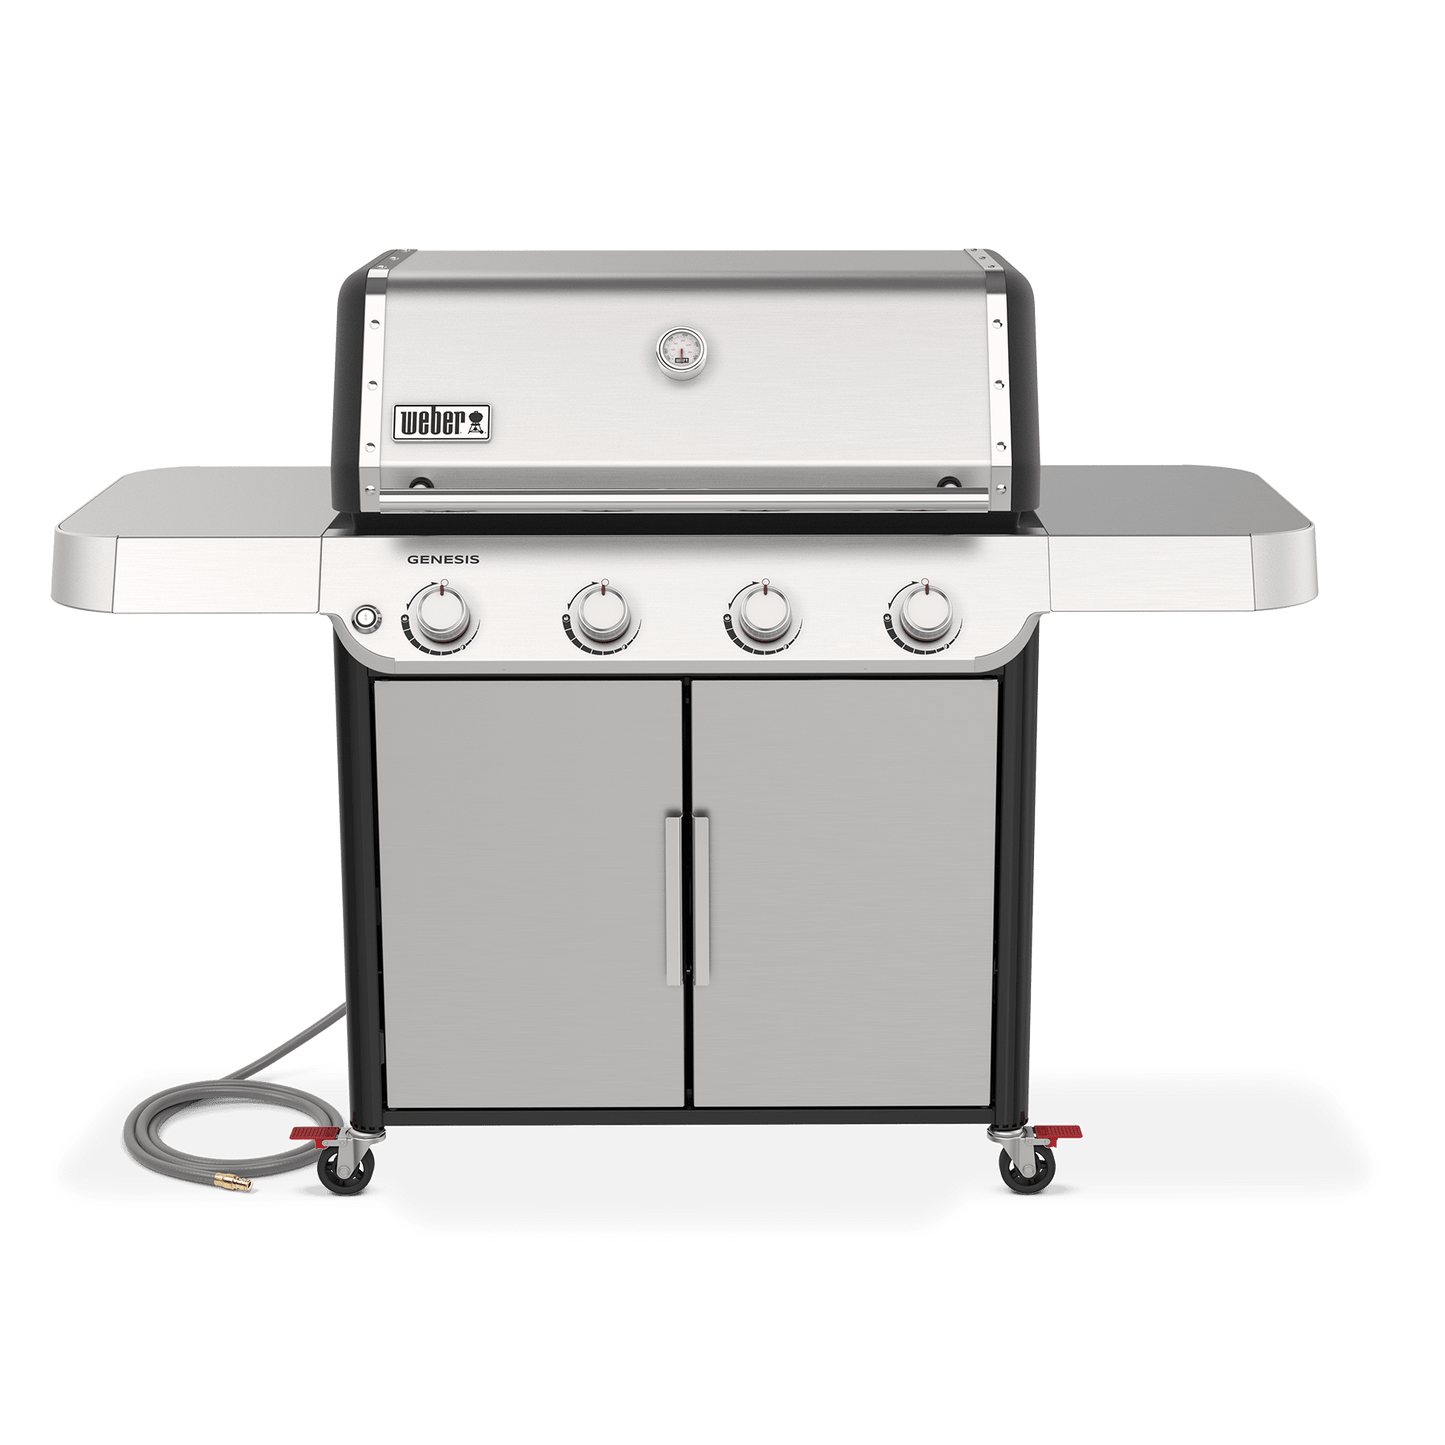 Weber 1500580 Genesis S-415 Gas Grill (Natural Gas) - Stainless Steel